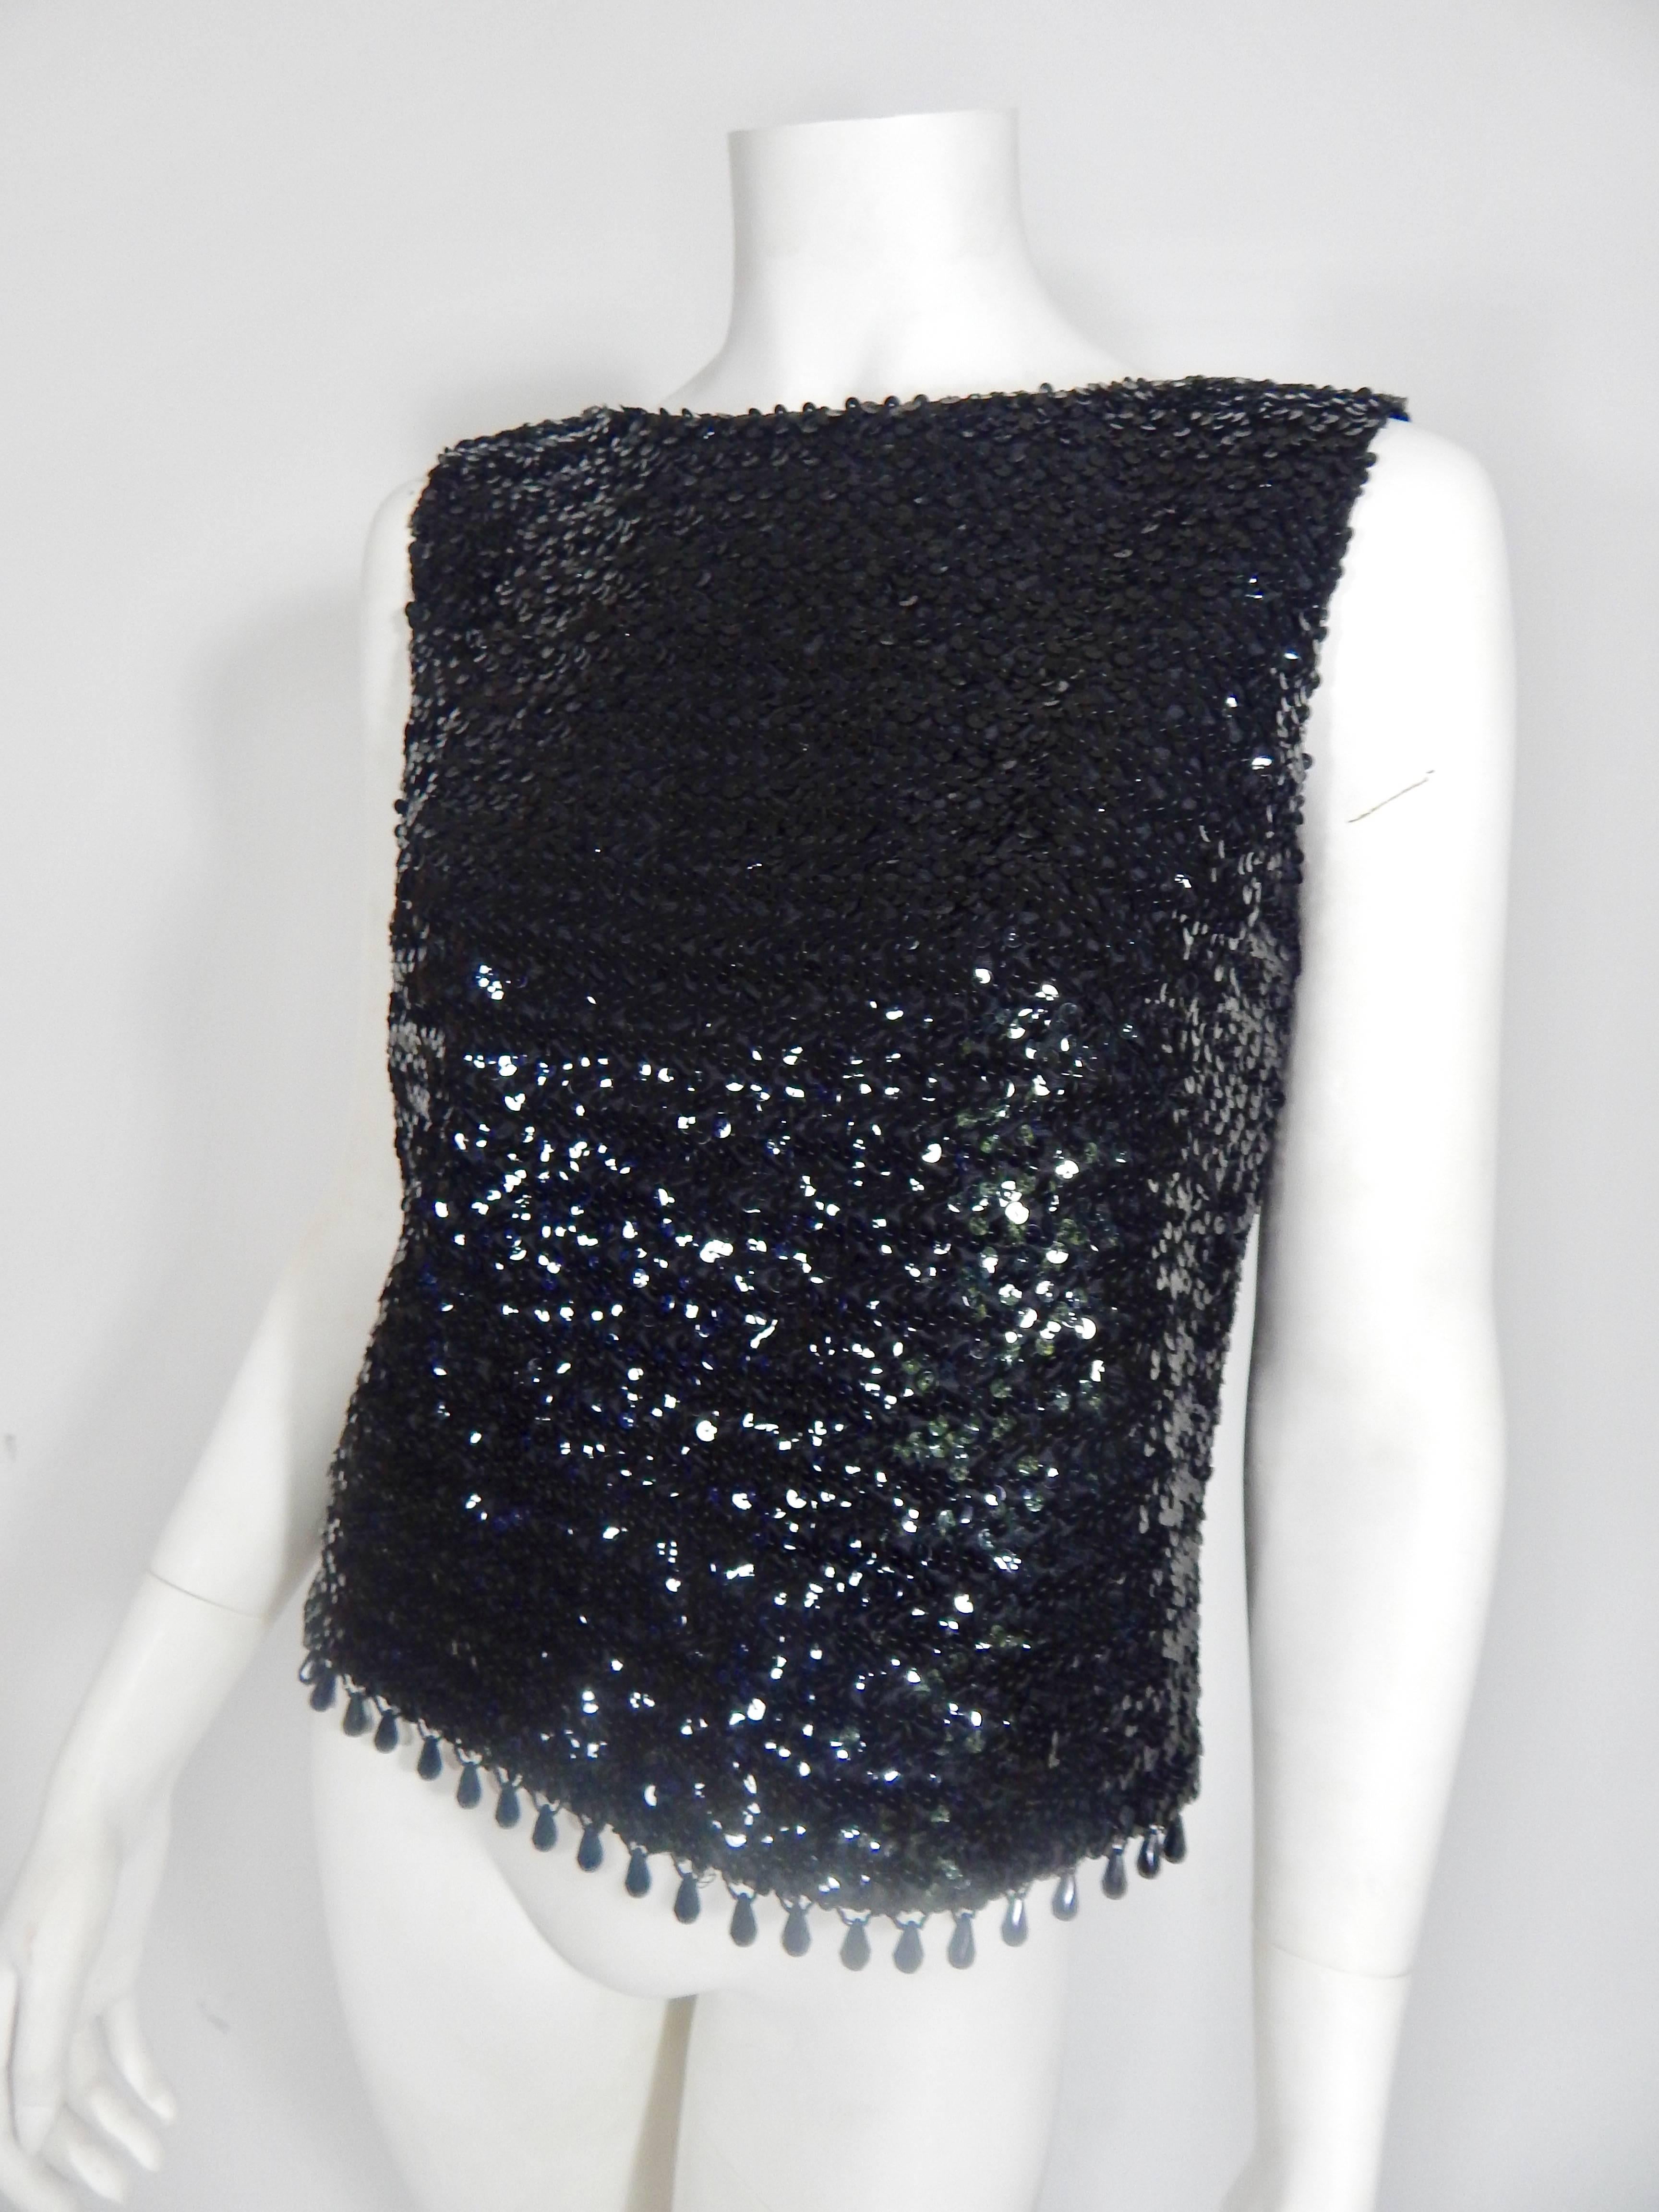 Late 1950s / Early 1960s Sequin Evening Top. Fringe Beading on bottom. Interior and Exterior in Excellent Condition. Fully lined in black. Bust size 36. 